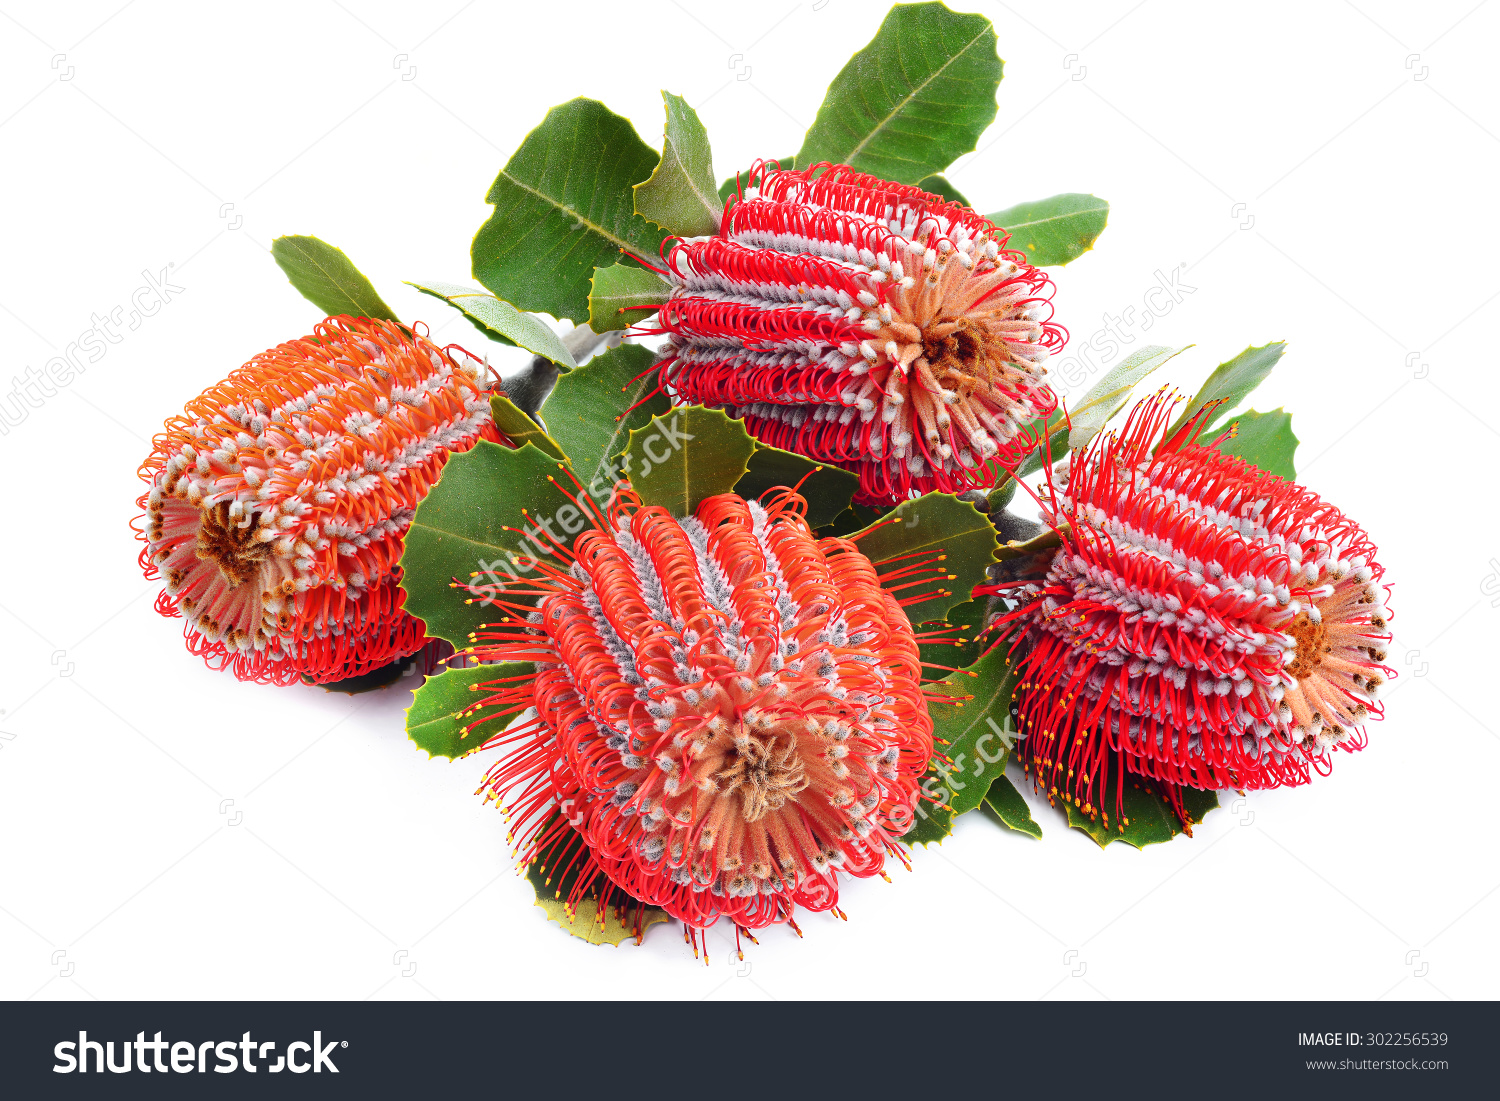 Closed Banksia Coccinea Flowers Head Leaves Stock Photo 302256539.